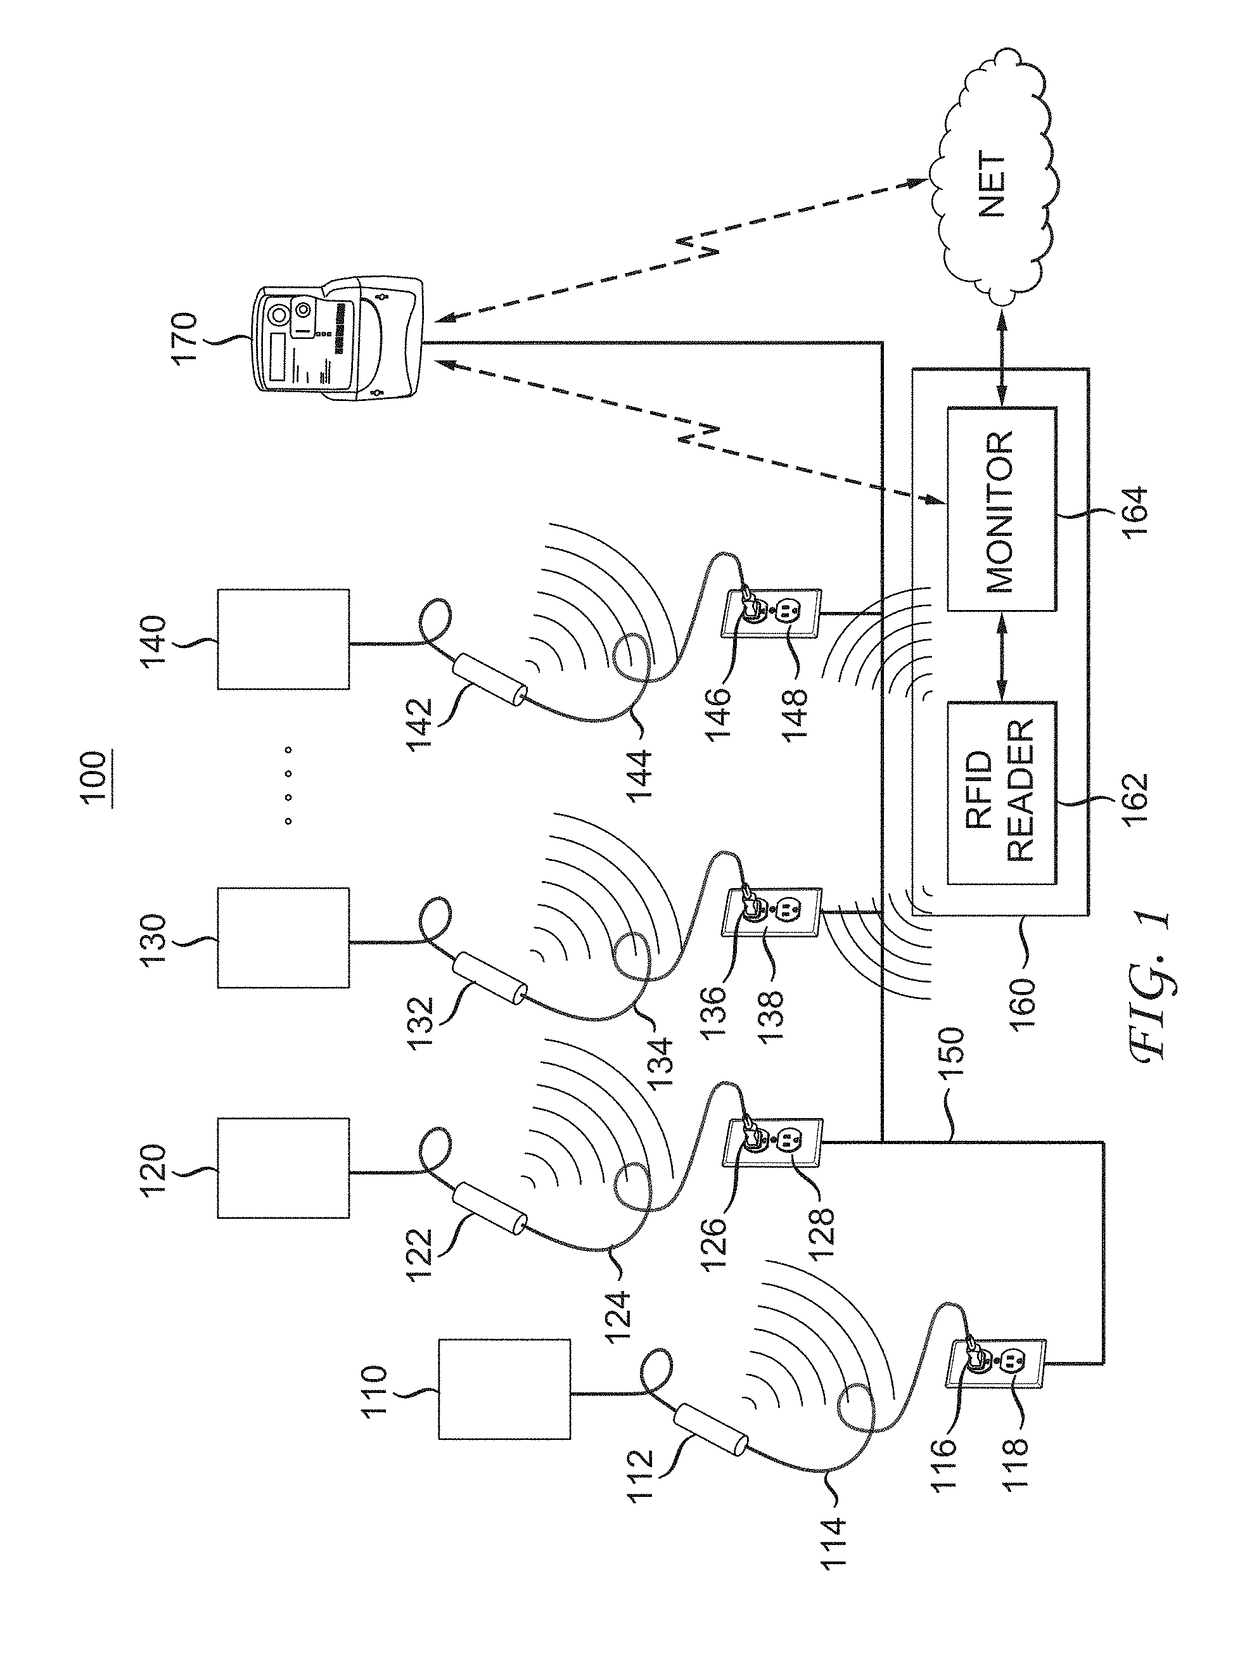 Method and apparatus for switch on/off impulse detection